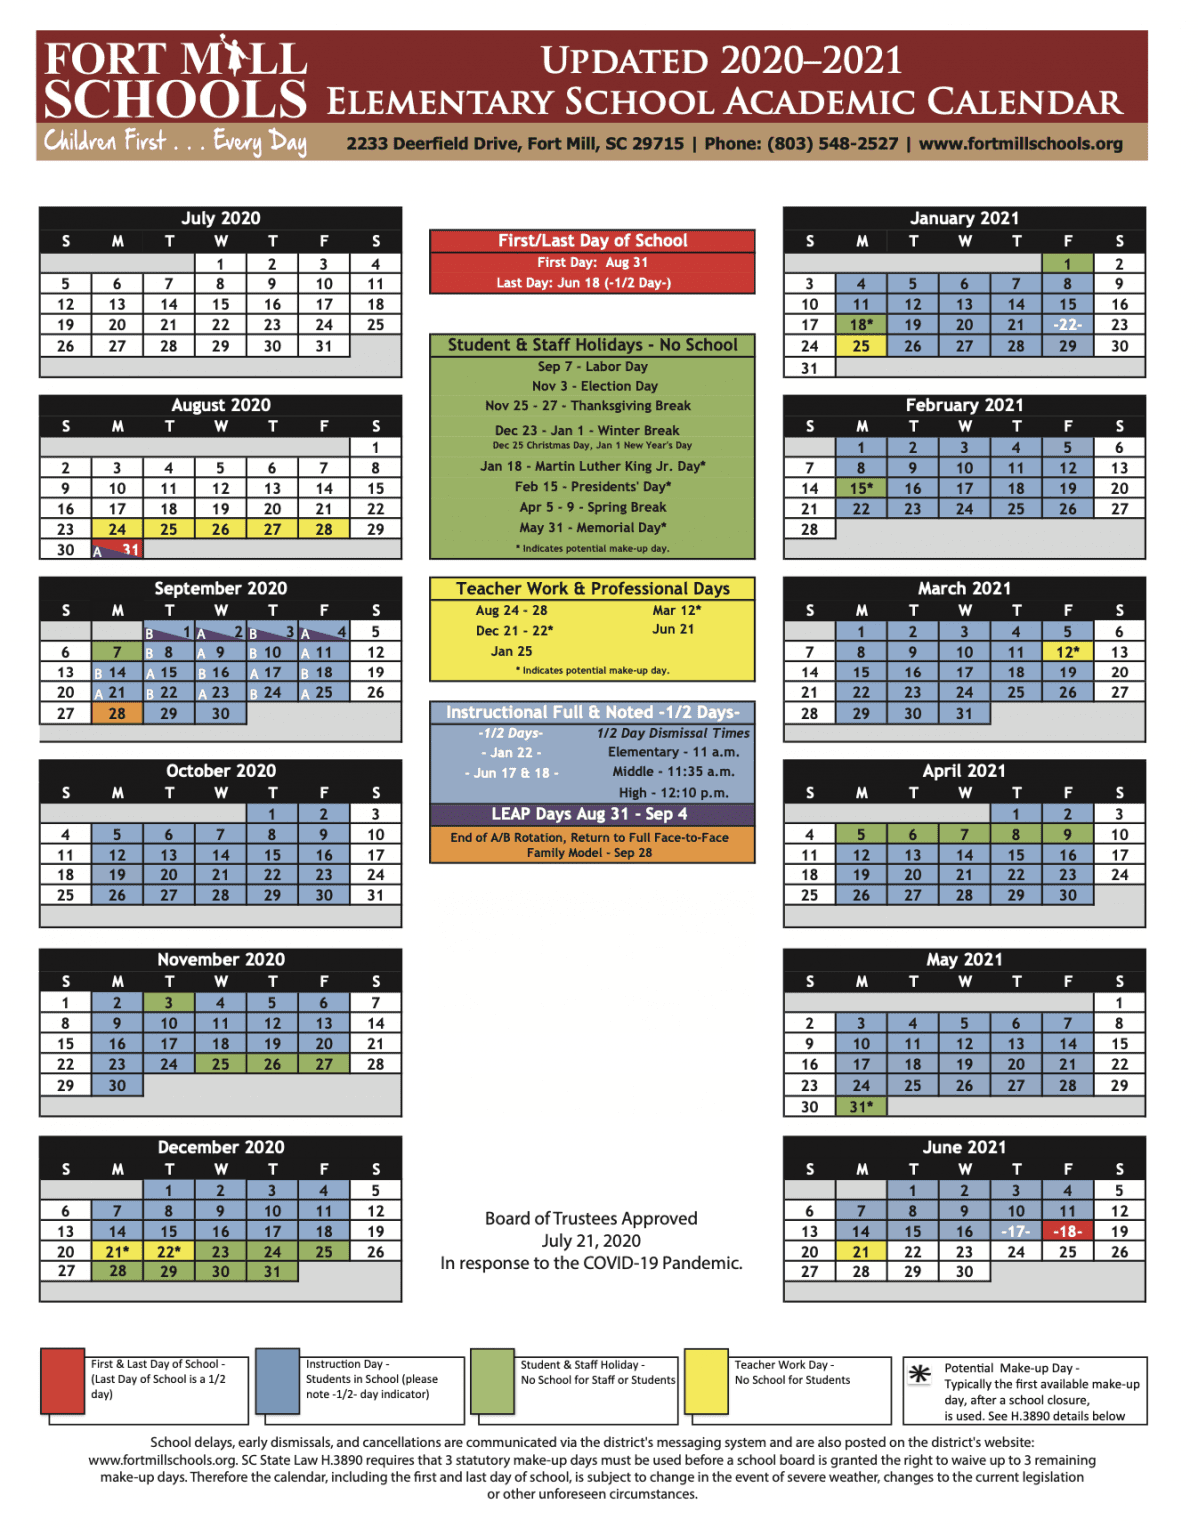 AB Calendars are Released for Elementary, Middle & High Schools in